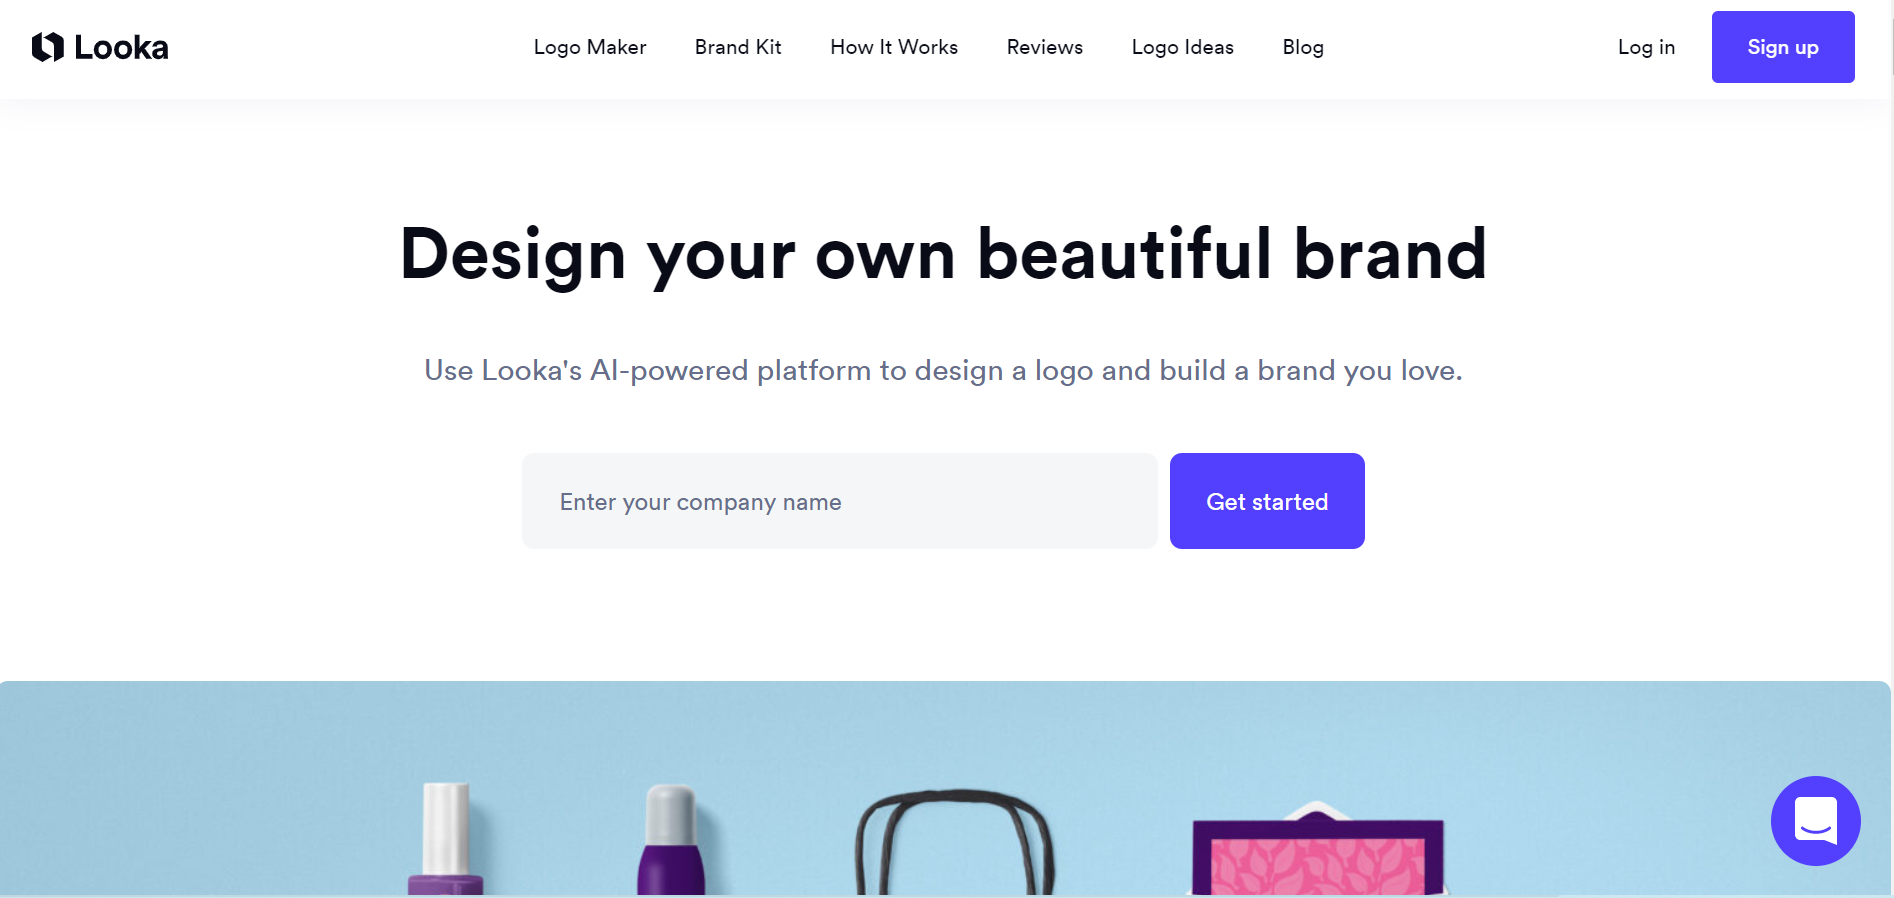 Unleash Your Brand’s Potential with Looka.com’s AI-Powered Logo Maker!